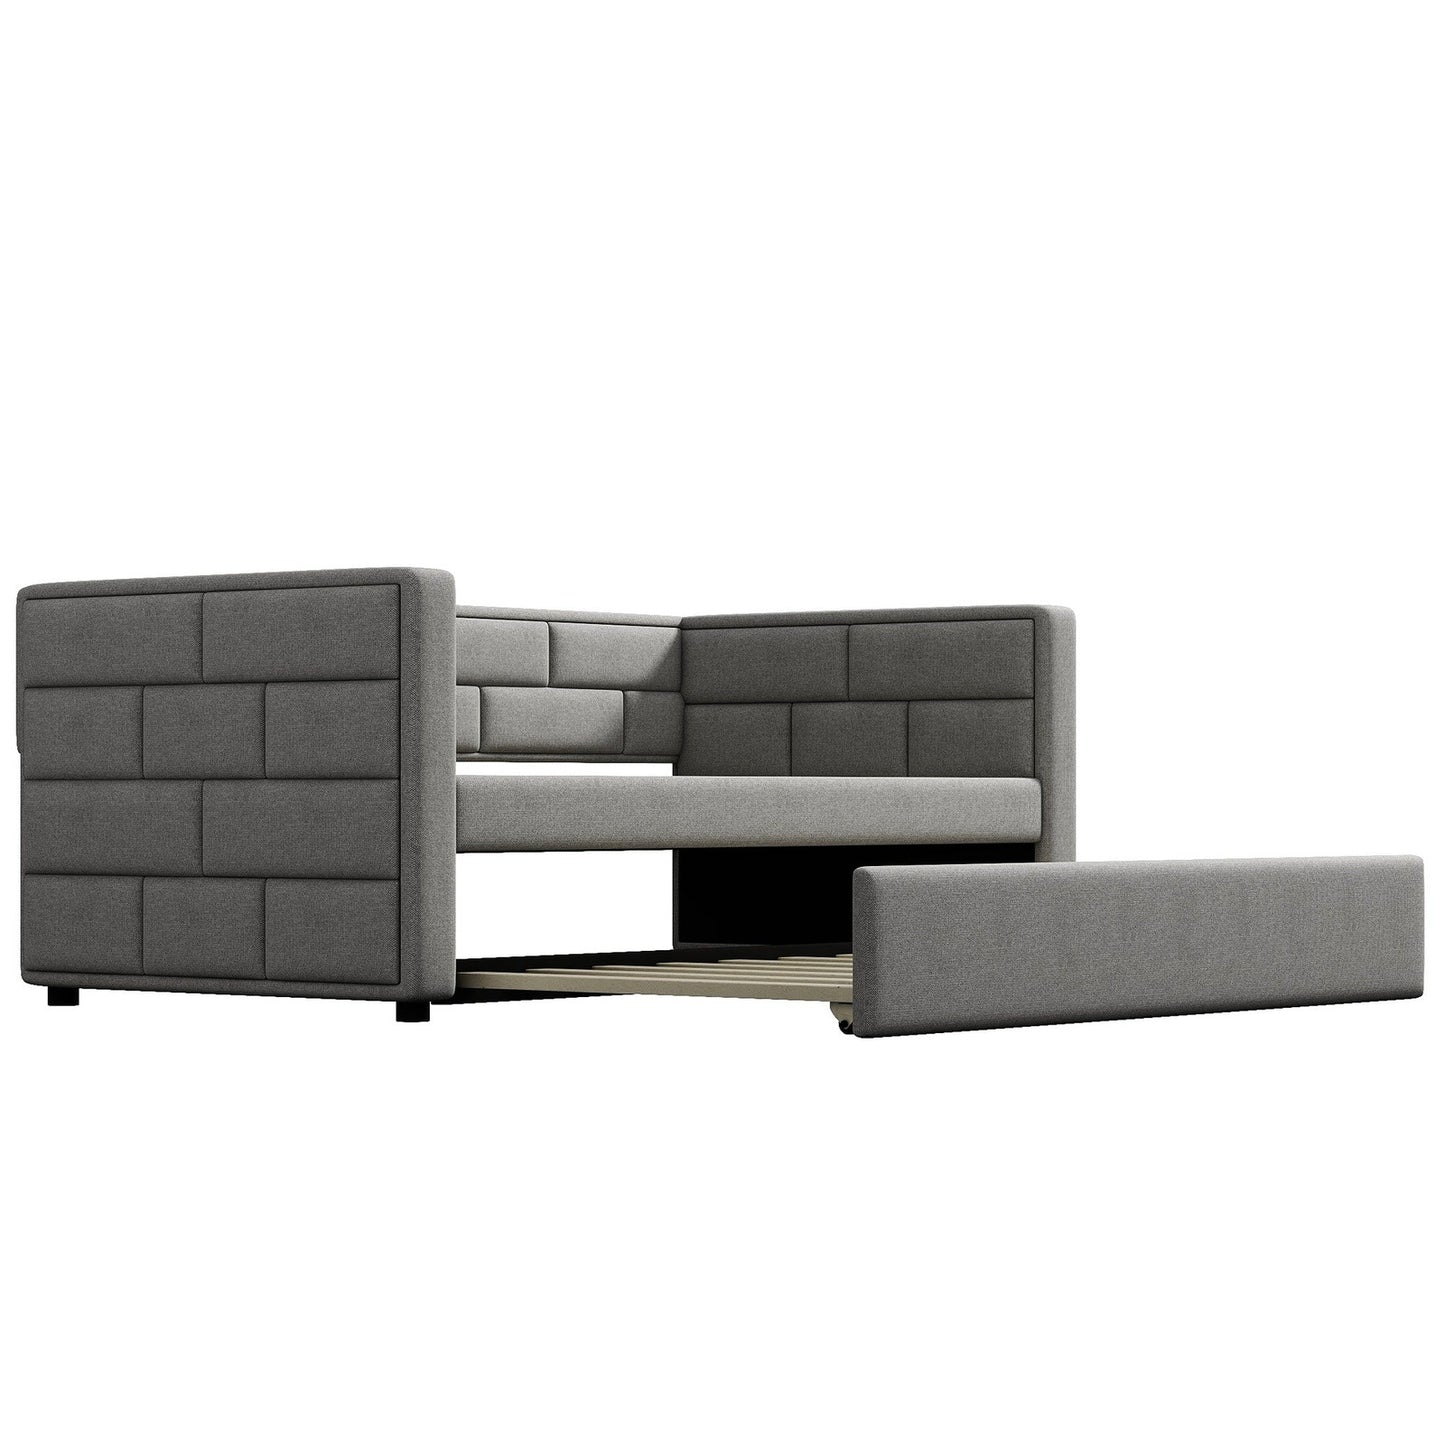 Twin Size Daybed with Trundle in Cube Tufted Gray Upholstery